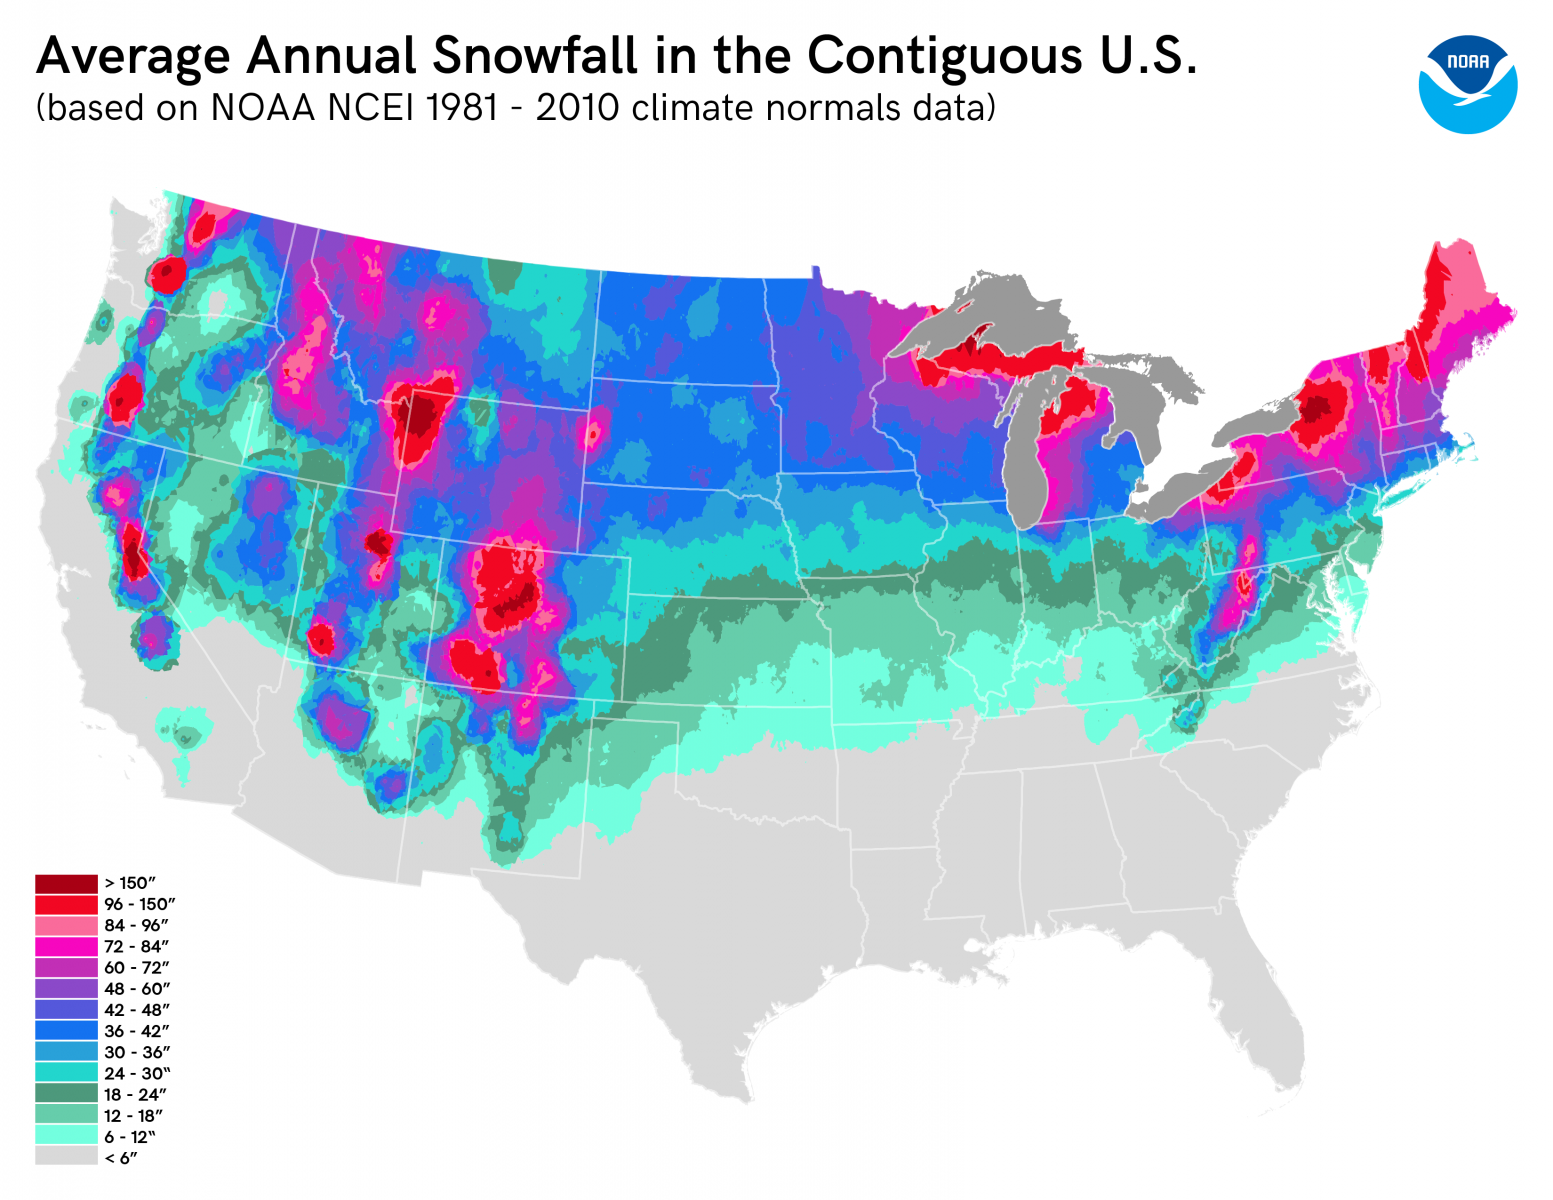 Map of Average Annual Snowfall in Contiguous U.S. SnowBrains